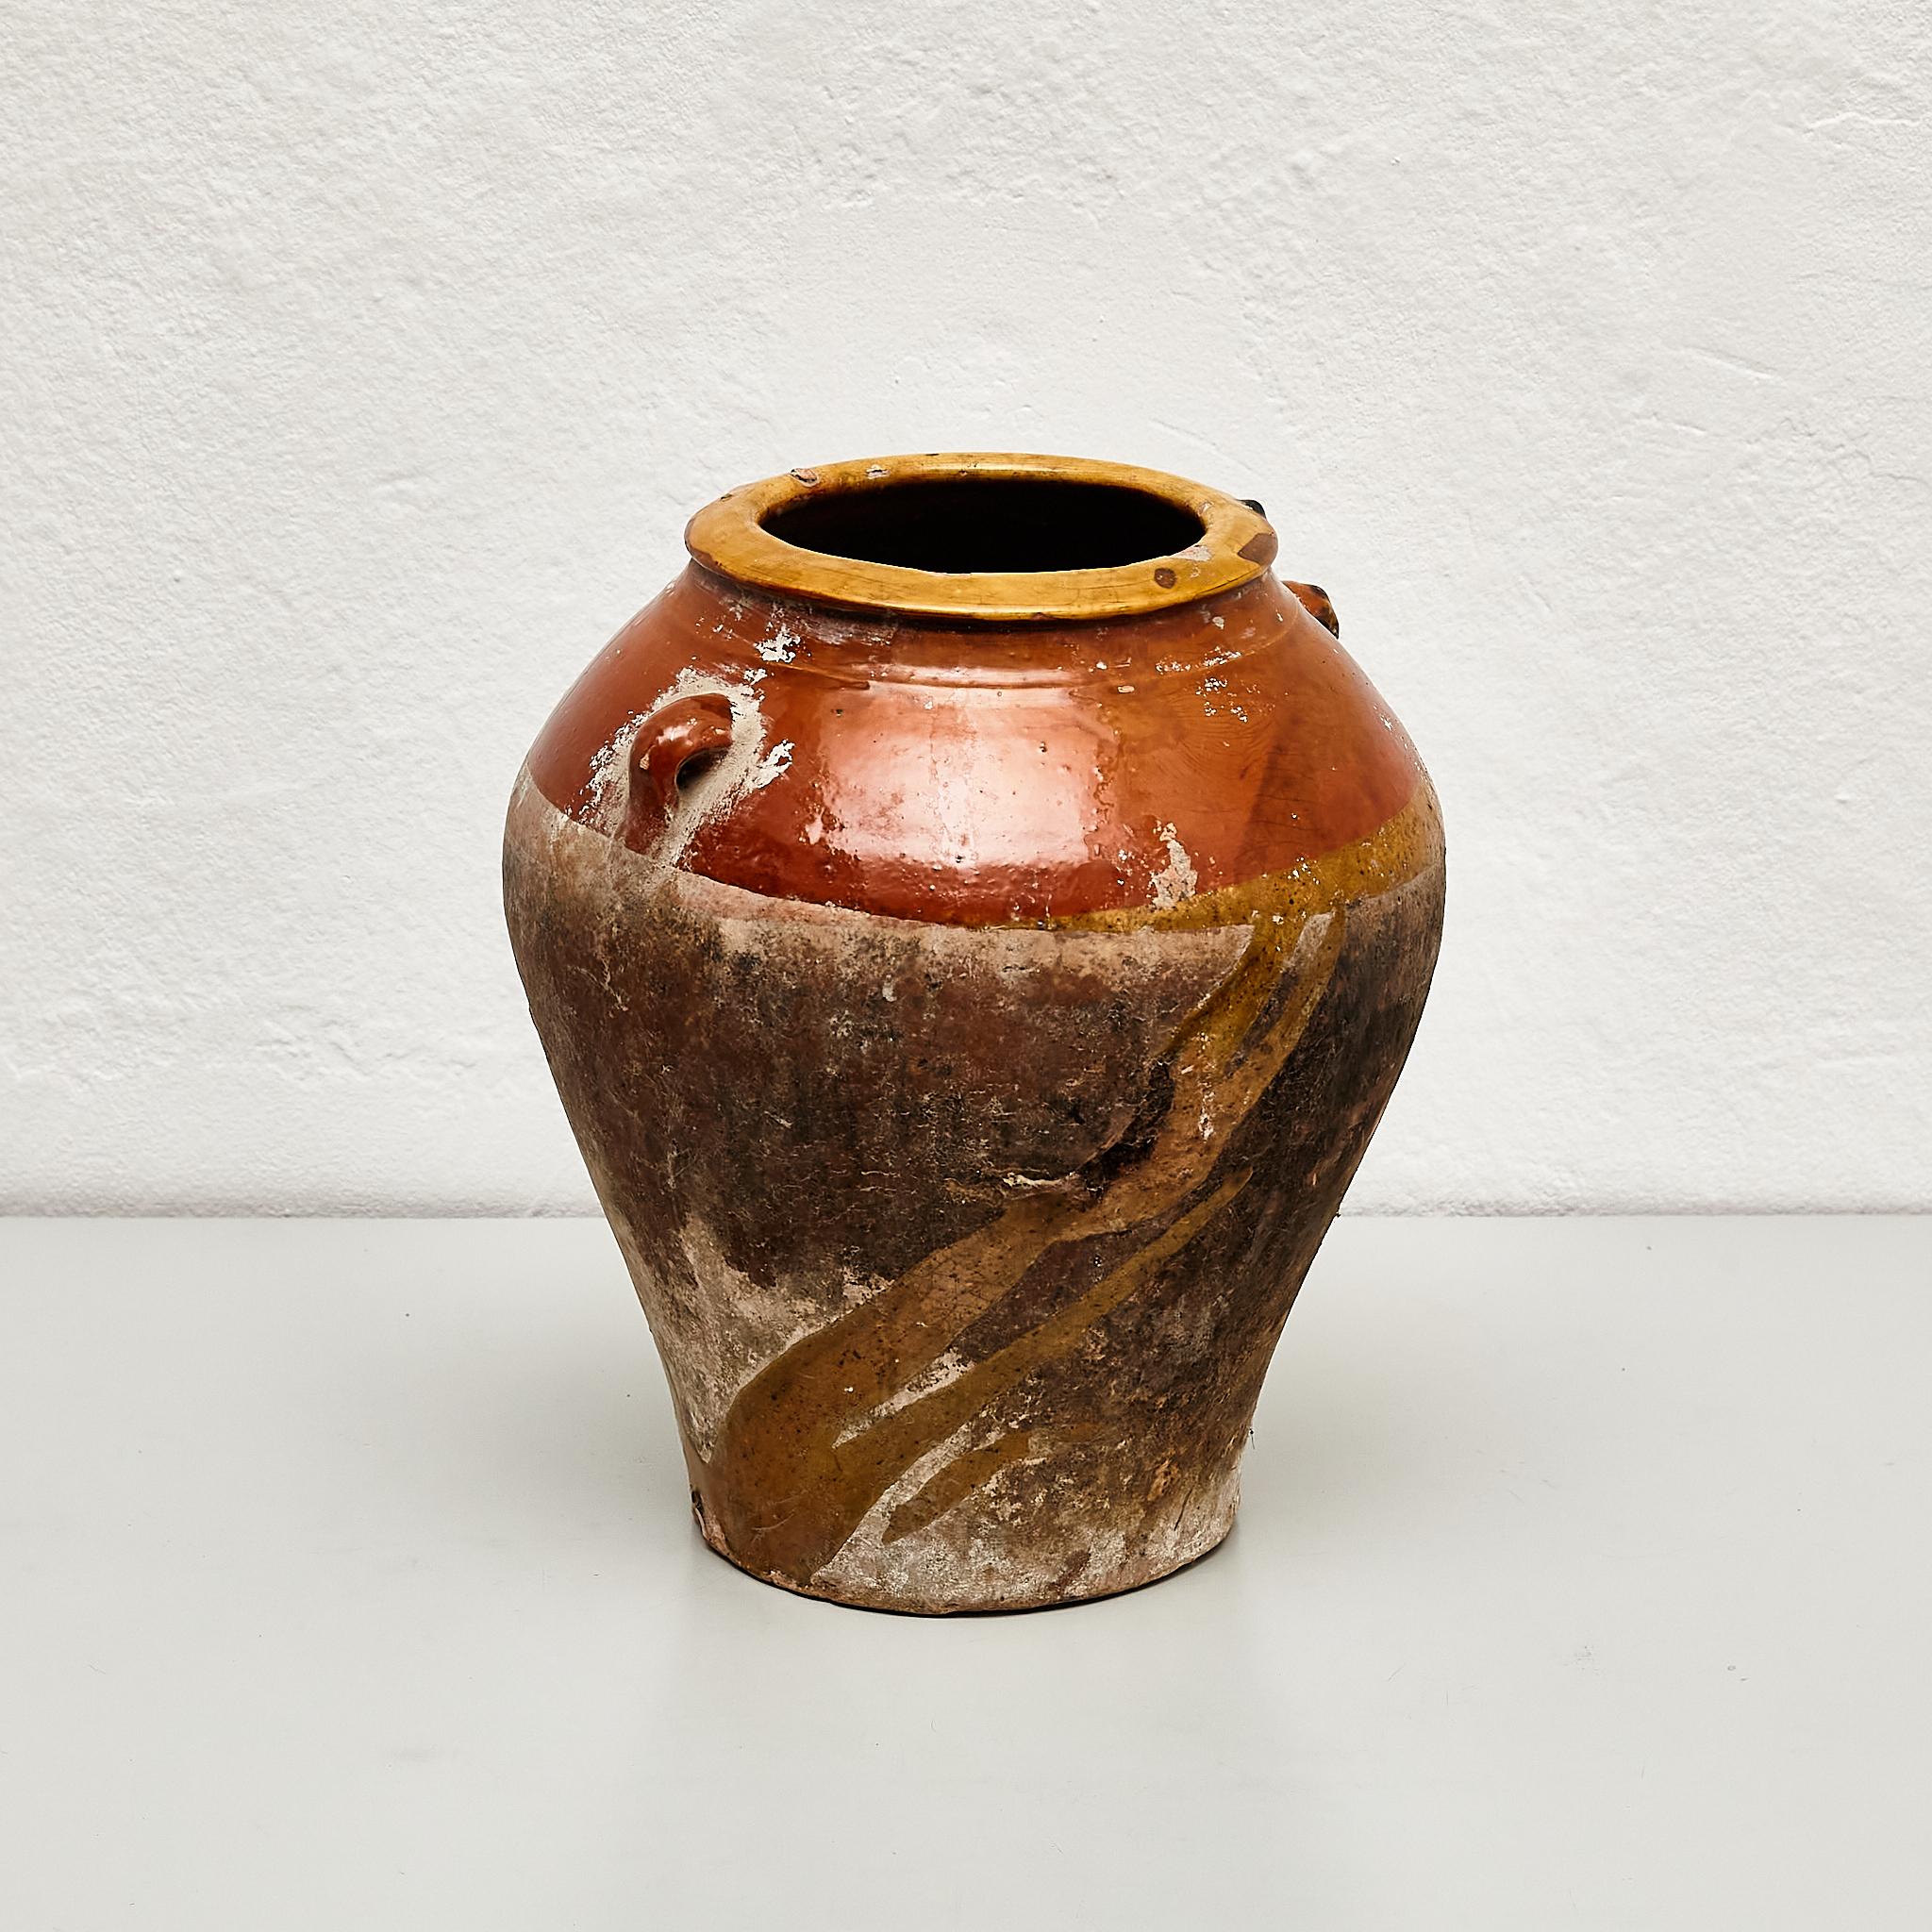 Early 20th century traditional Spanish ceramic vase.

Manufactured in Spain, early 20th century.

In original condition with minor wear consistent of age and use, preserving a beautiful patina.

Materials: 
Ceramic

Important information regarding